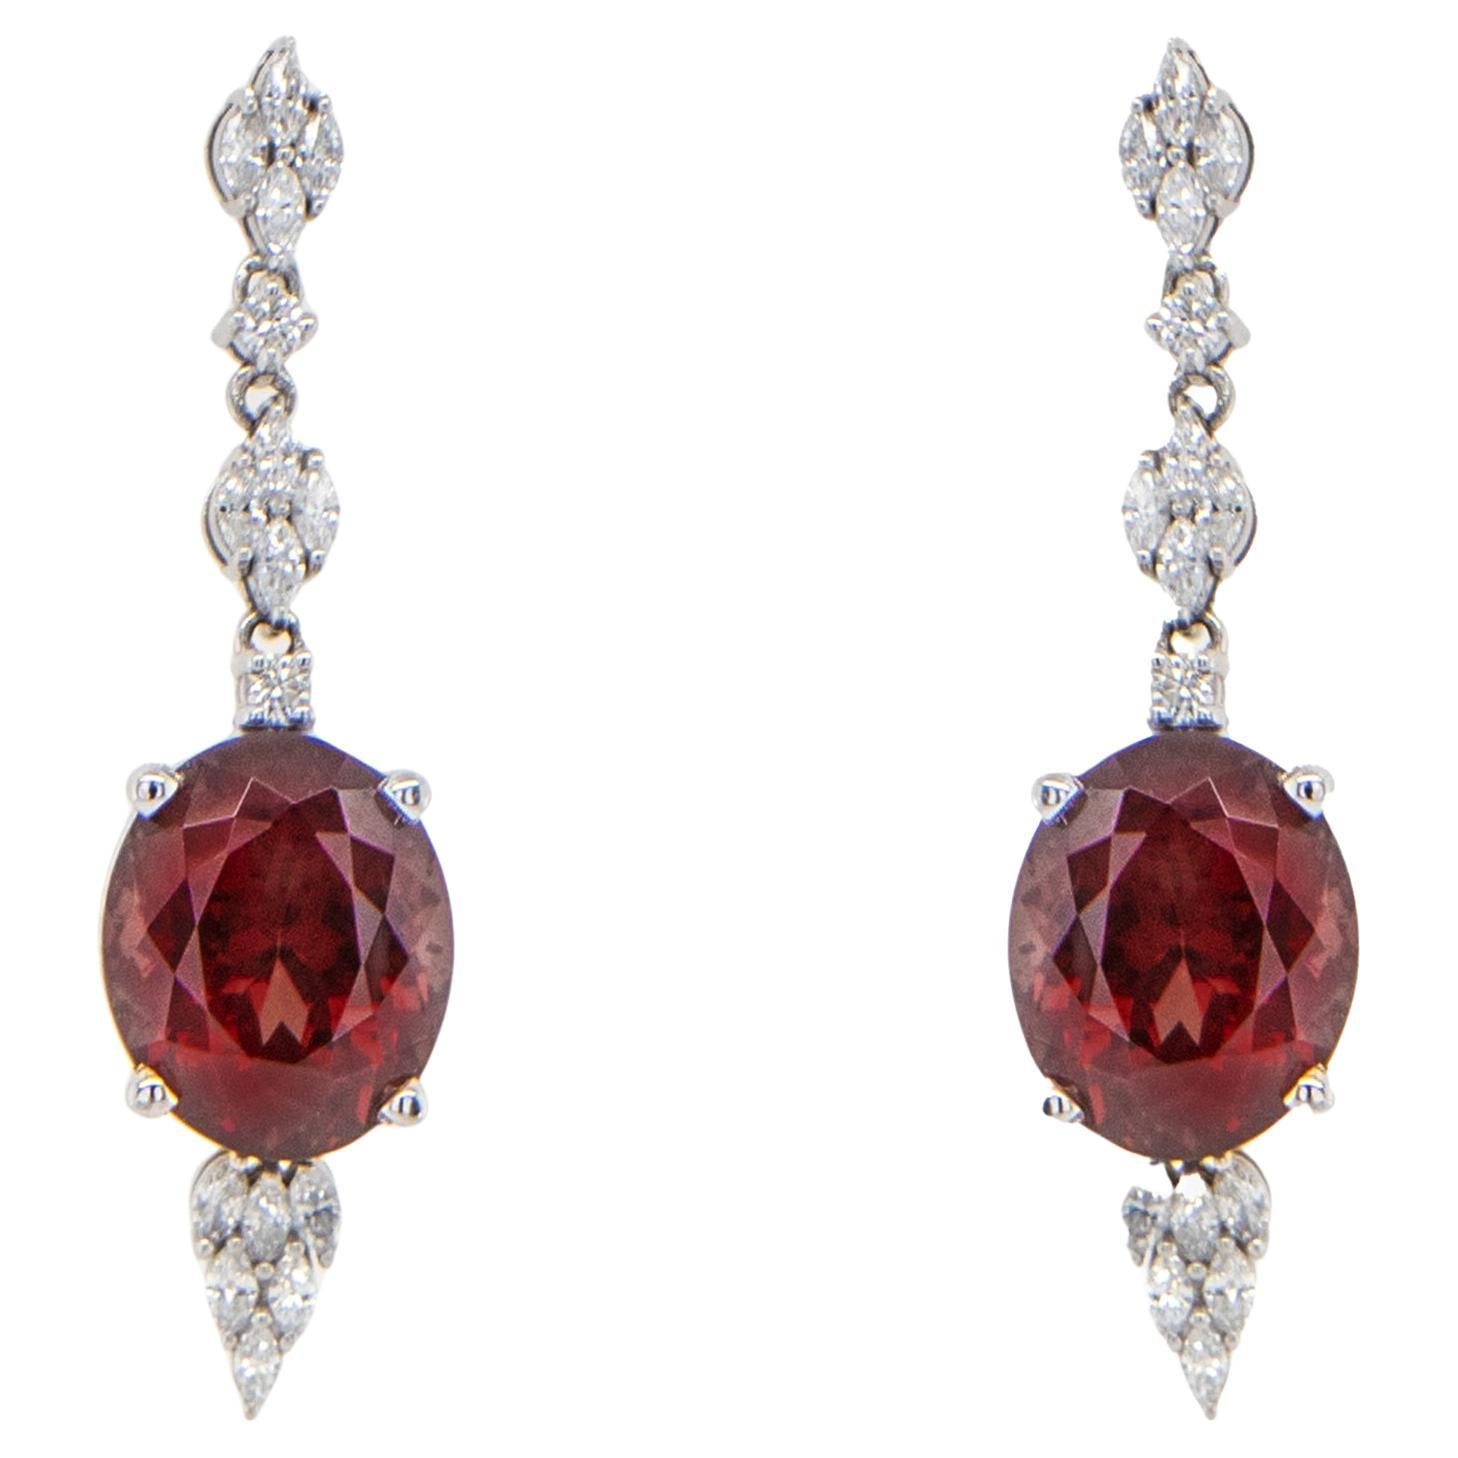 Rare Fancy Garnet and Diamond Earrings 16 Carats Total 18k White Gold For Sale